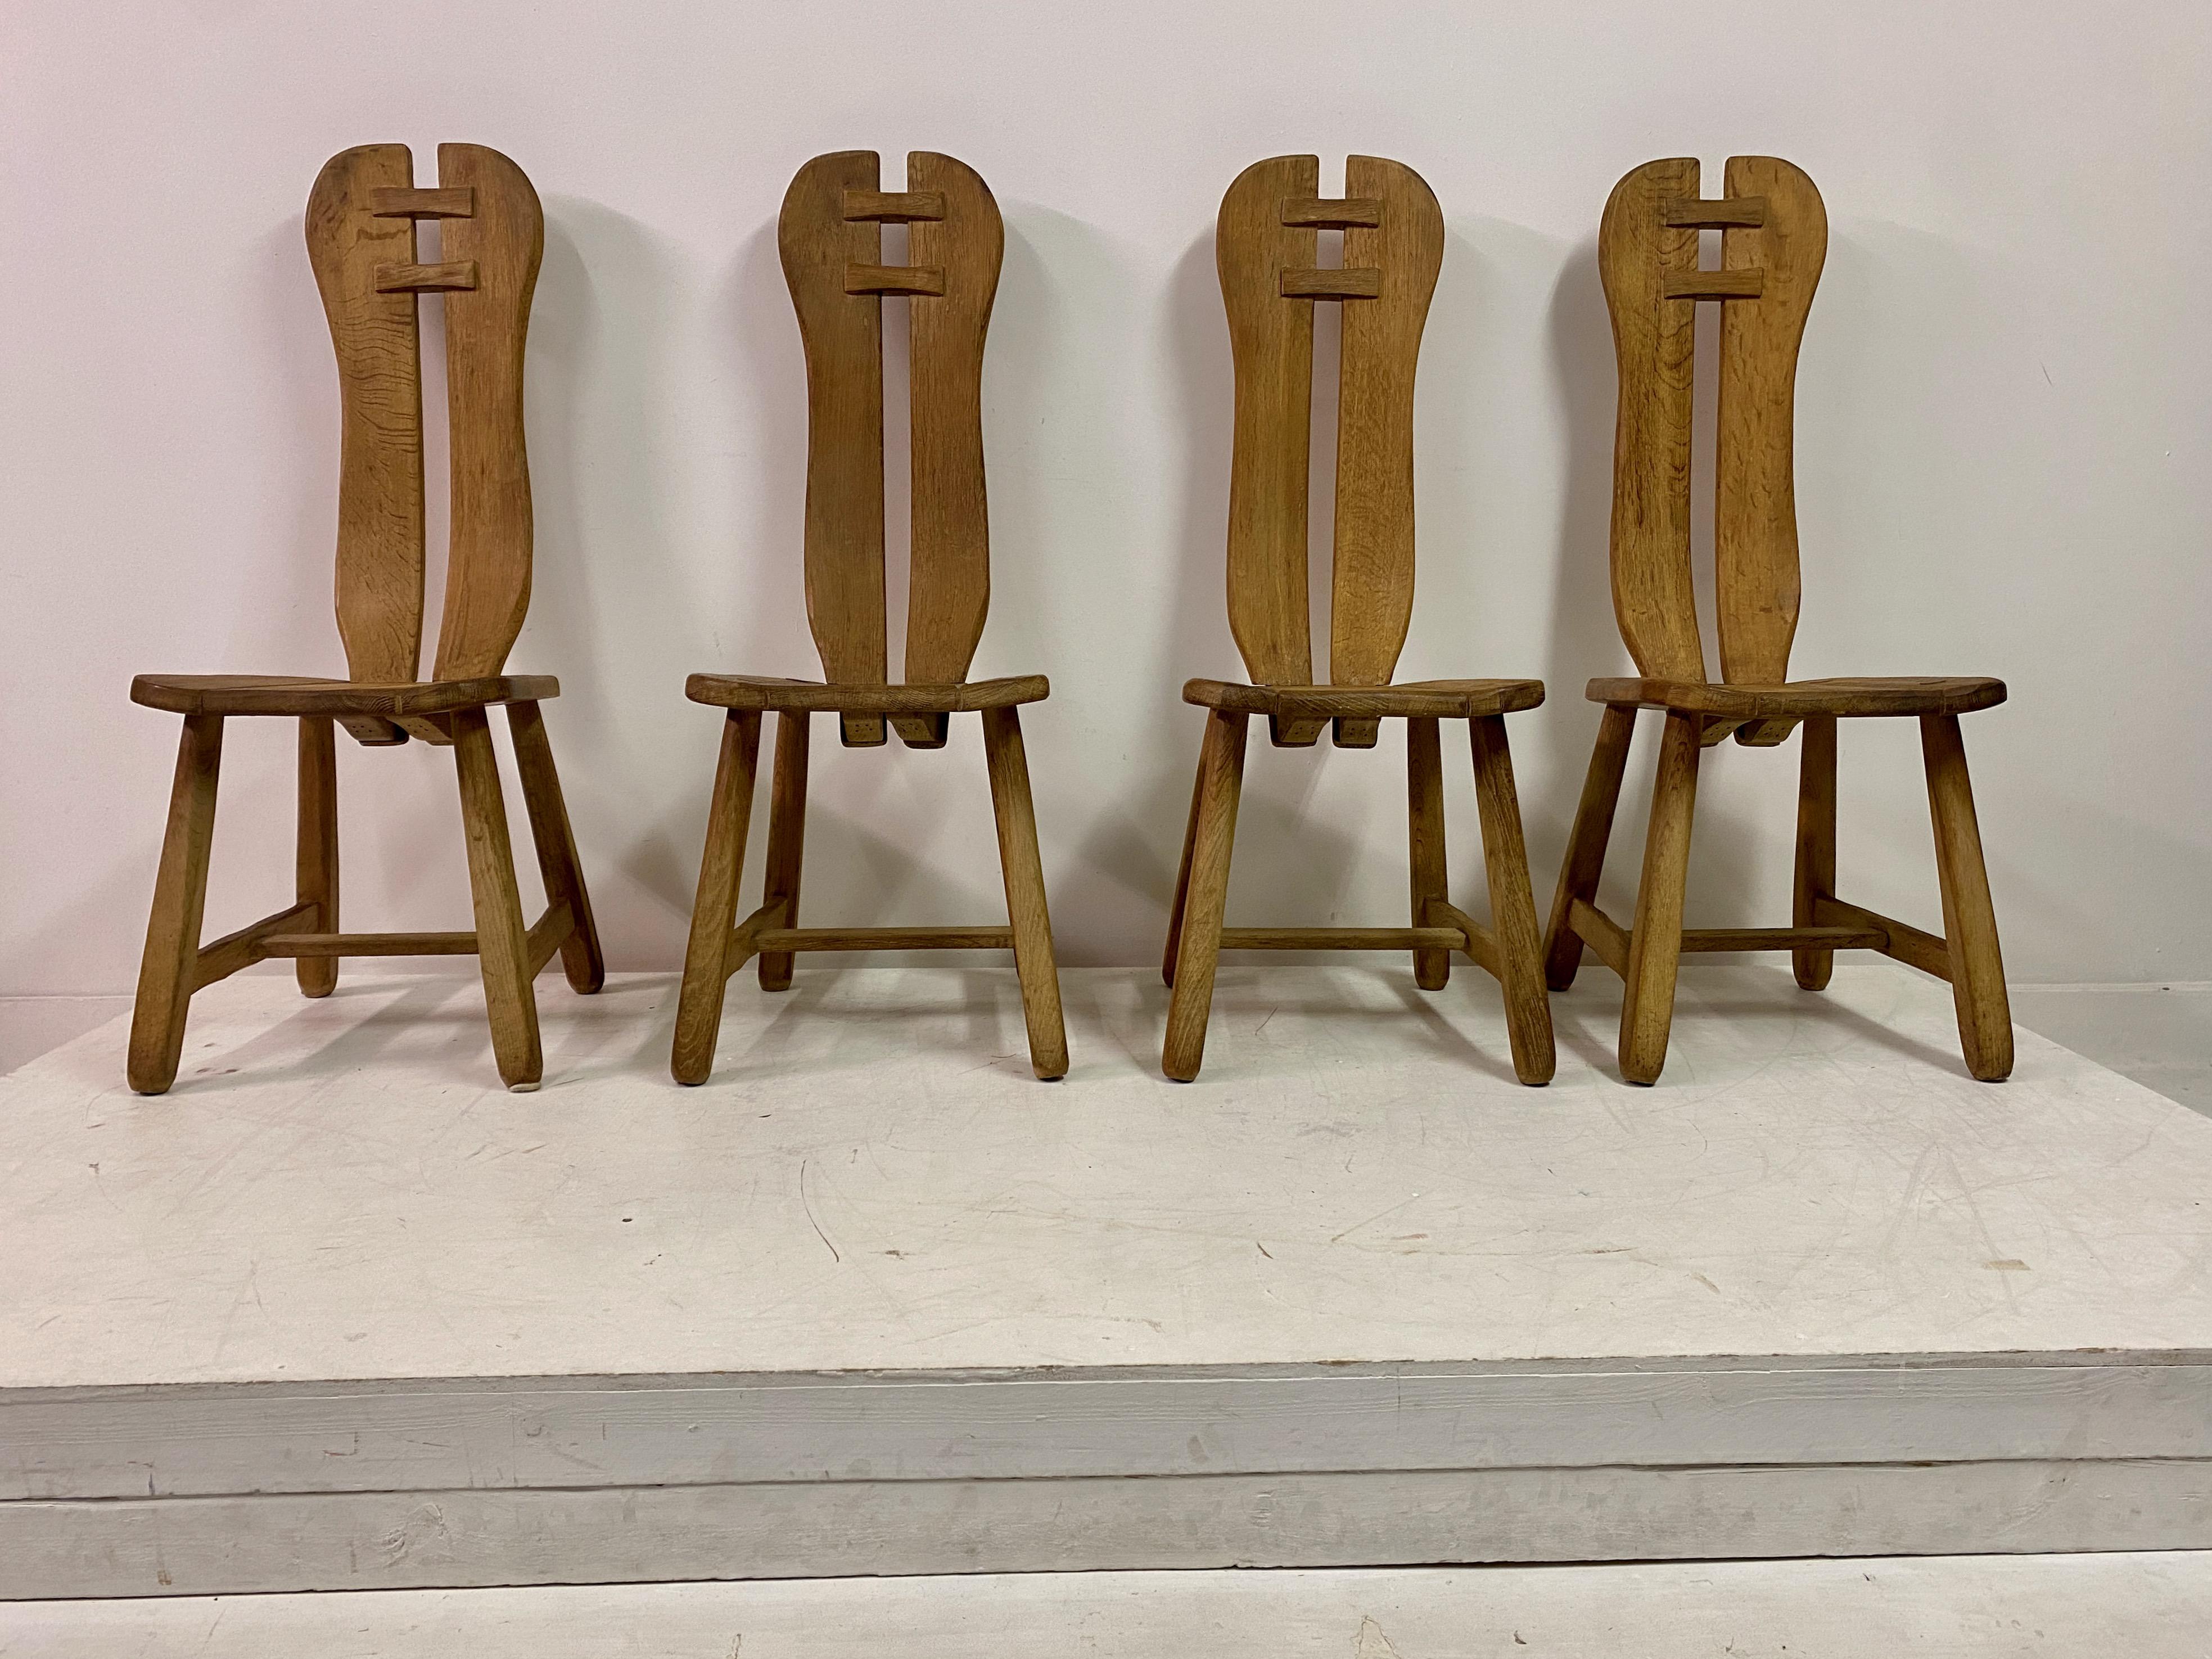 Set of four dining chairs

By De Puydt

Oak

Brutalist style

Belgium 1960s

Seat height 45cm